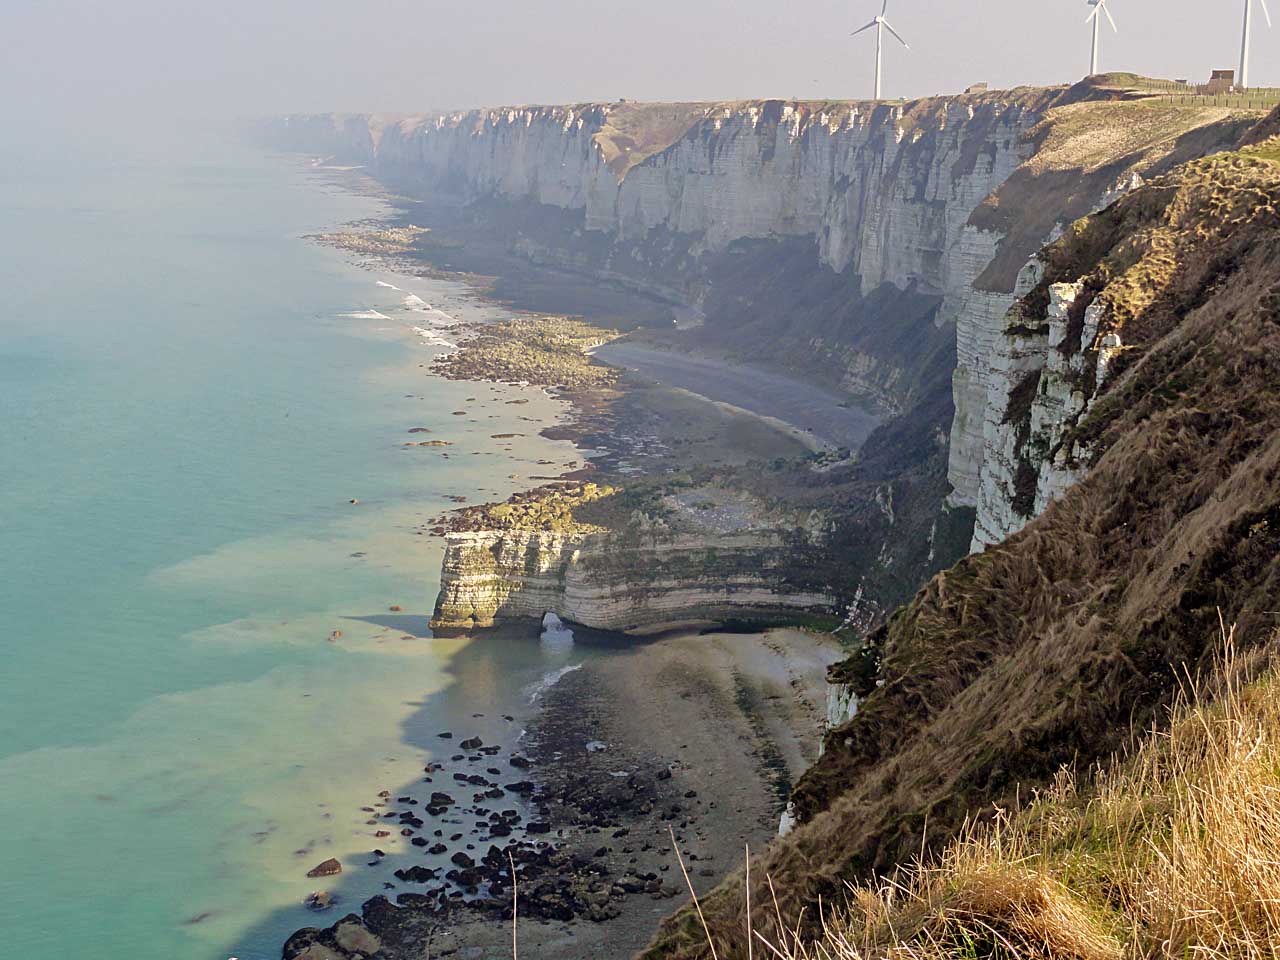 View of the Upstream cliff at Fécamp